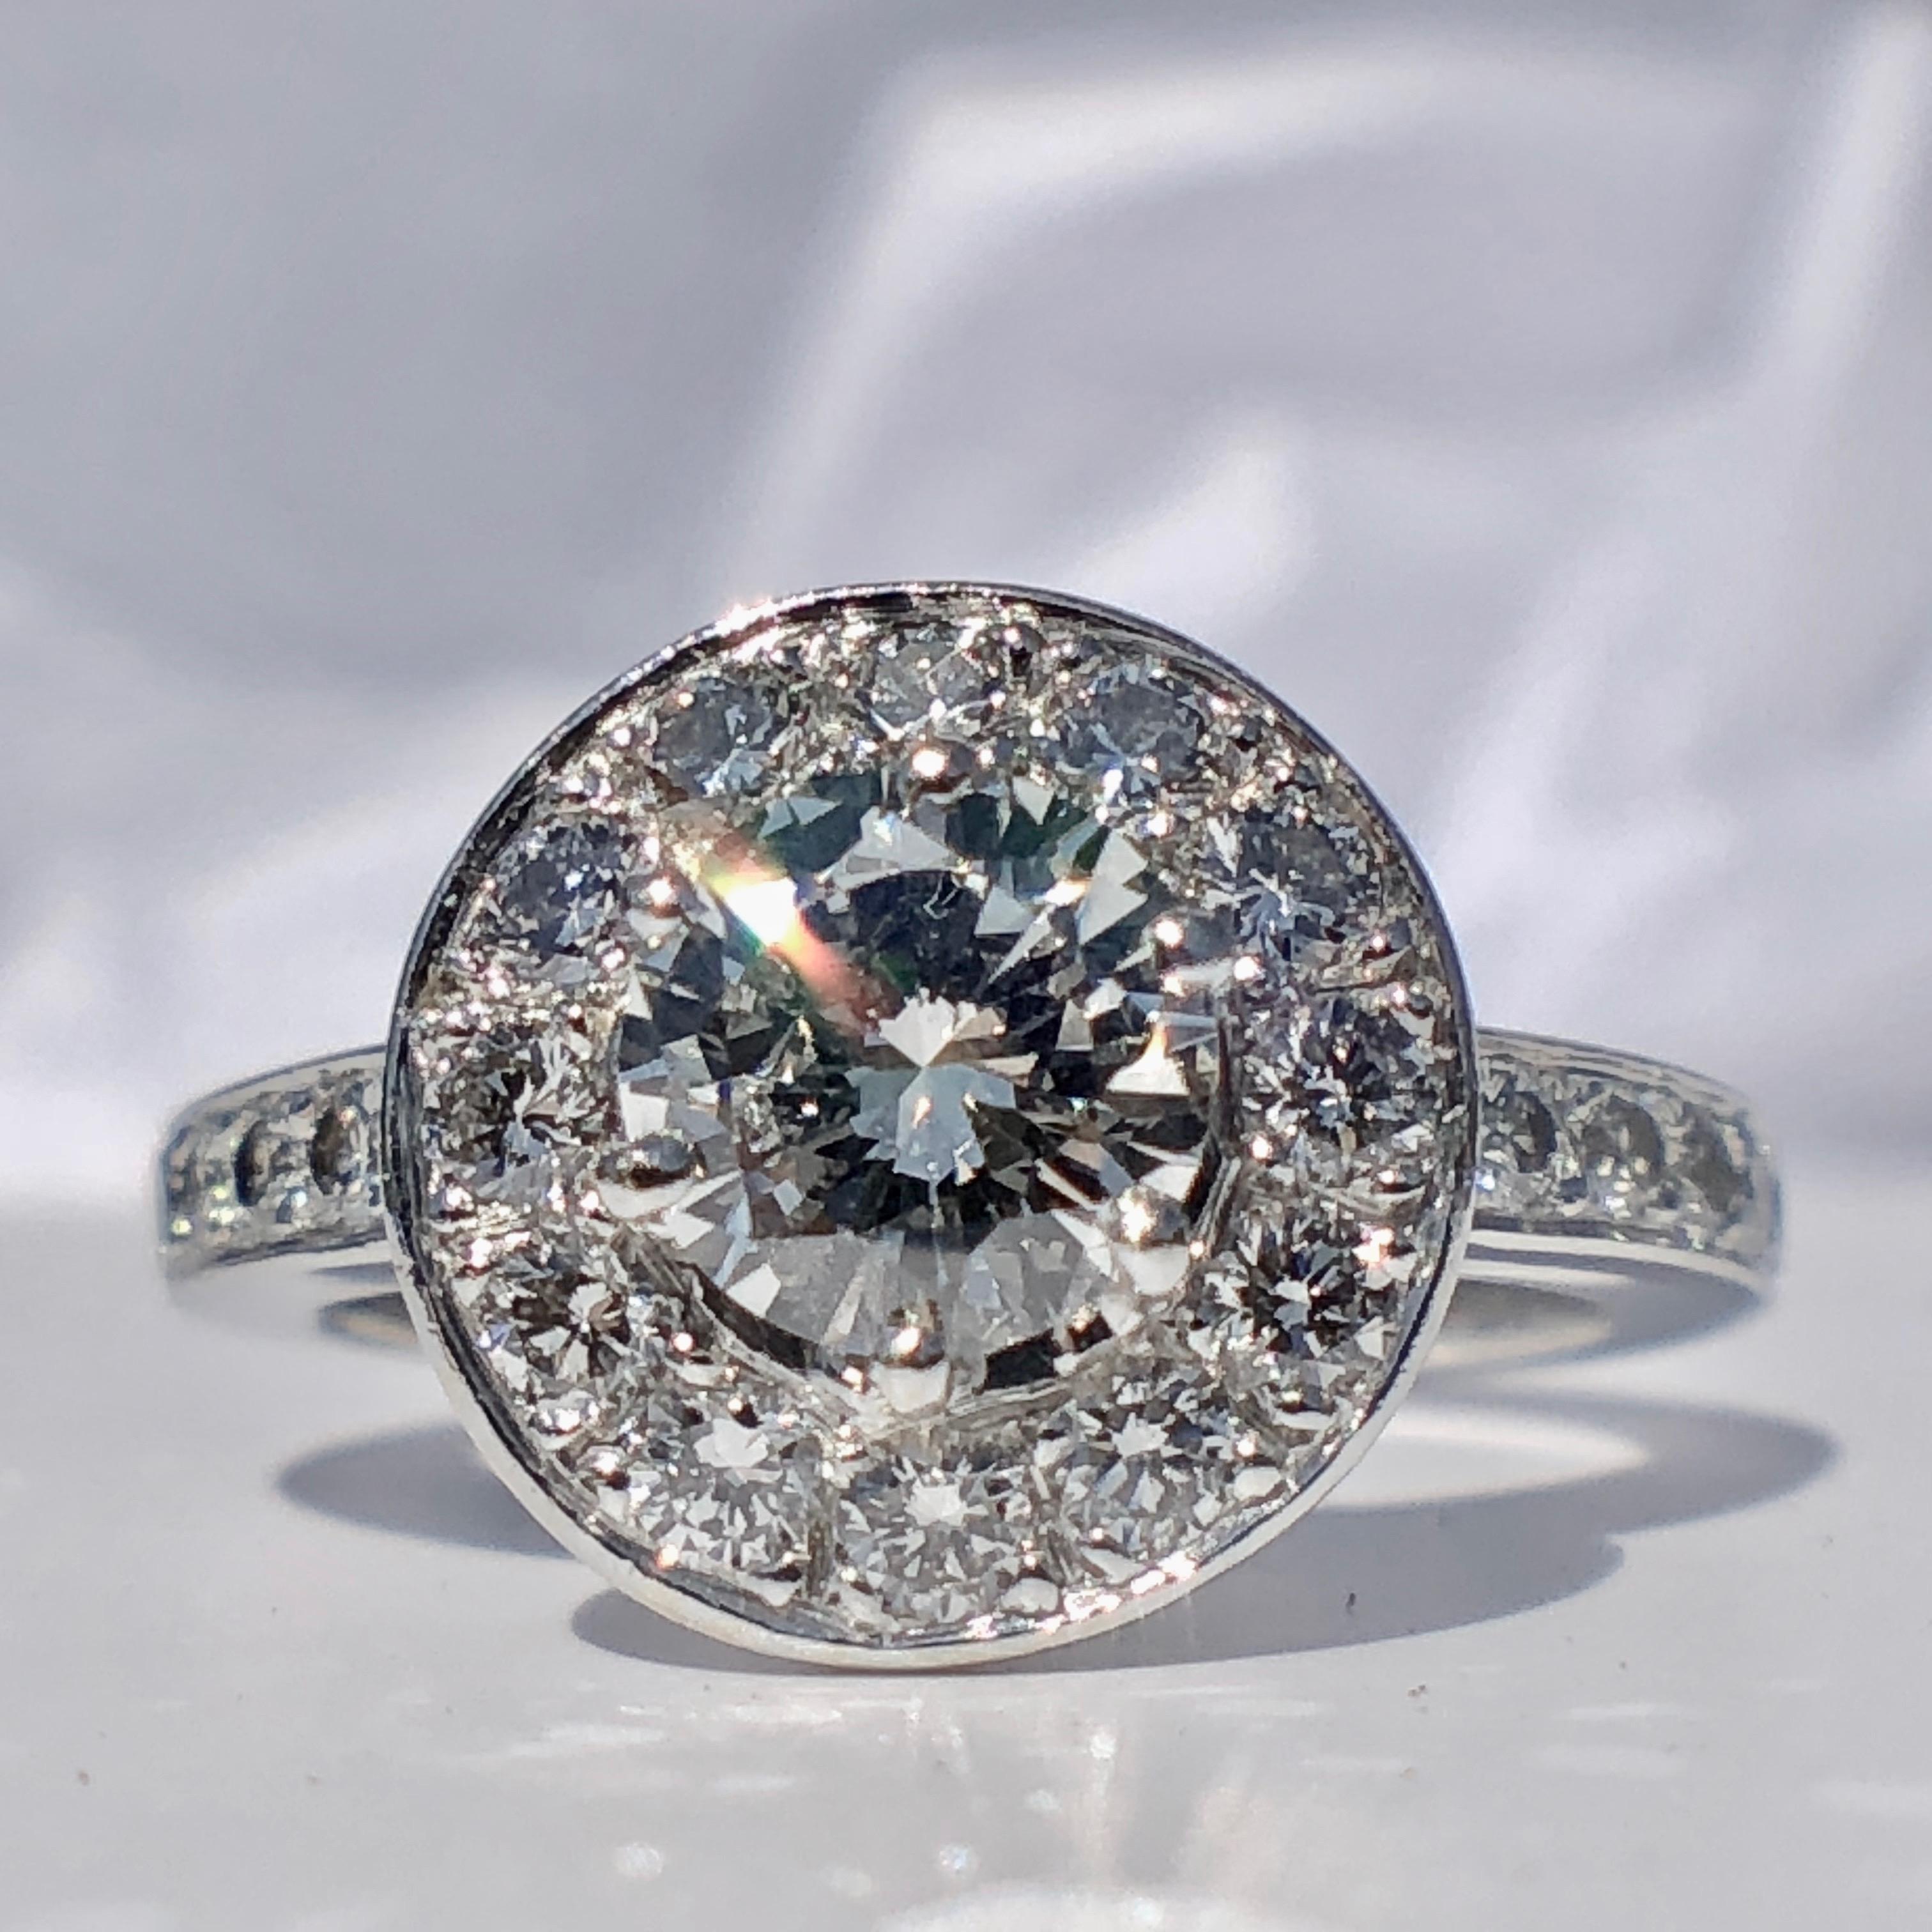 The central round brilliant cut white diamond dazzles with the most exceptional fire and sparkle, framed by more diamonds for the beautiful halo.

Simply stunning, this beautiful 18k white gold diamond halo ring is designed to sparkle. Inspired by